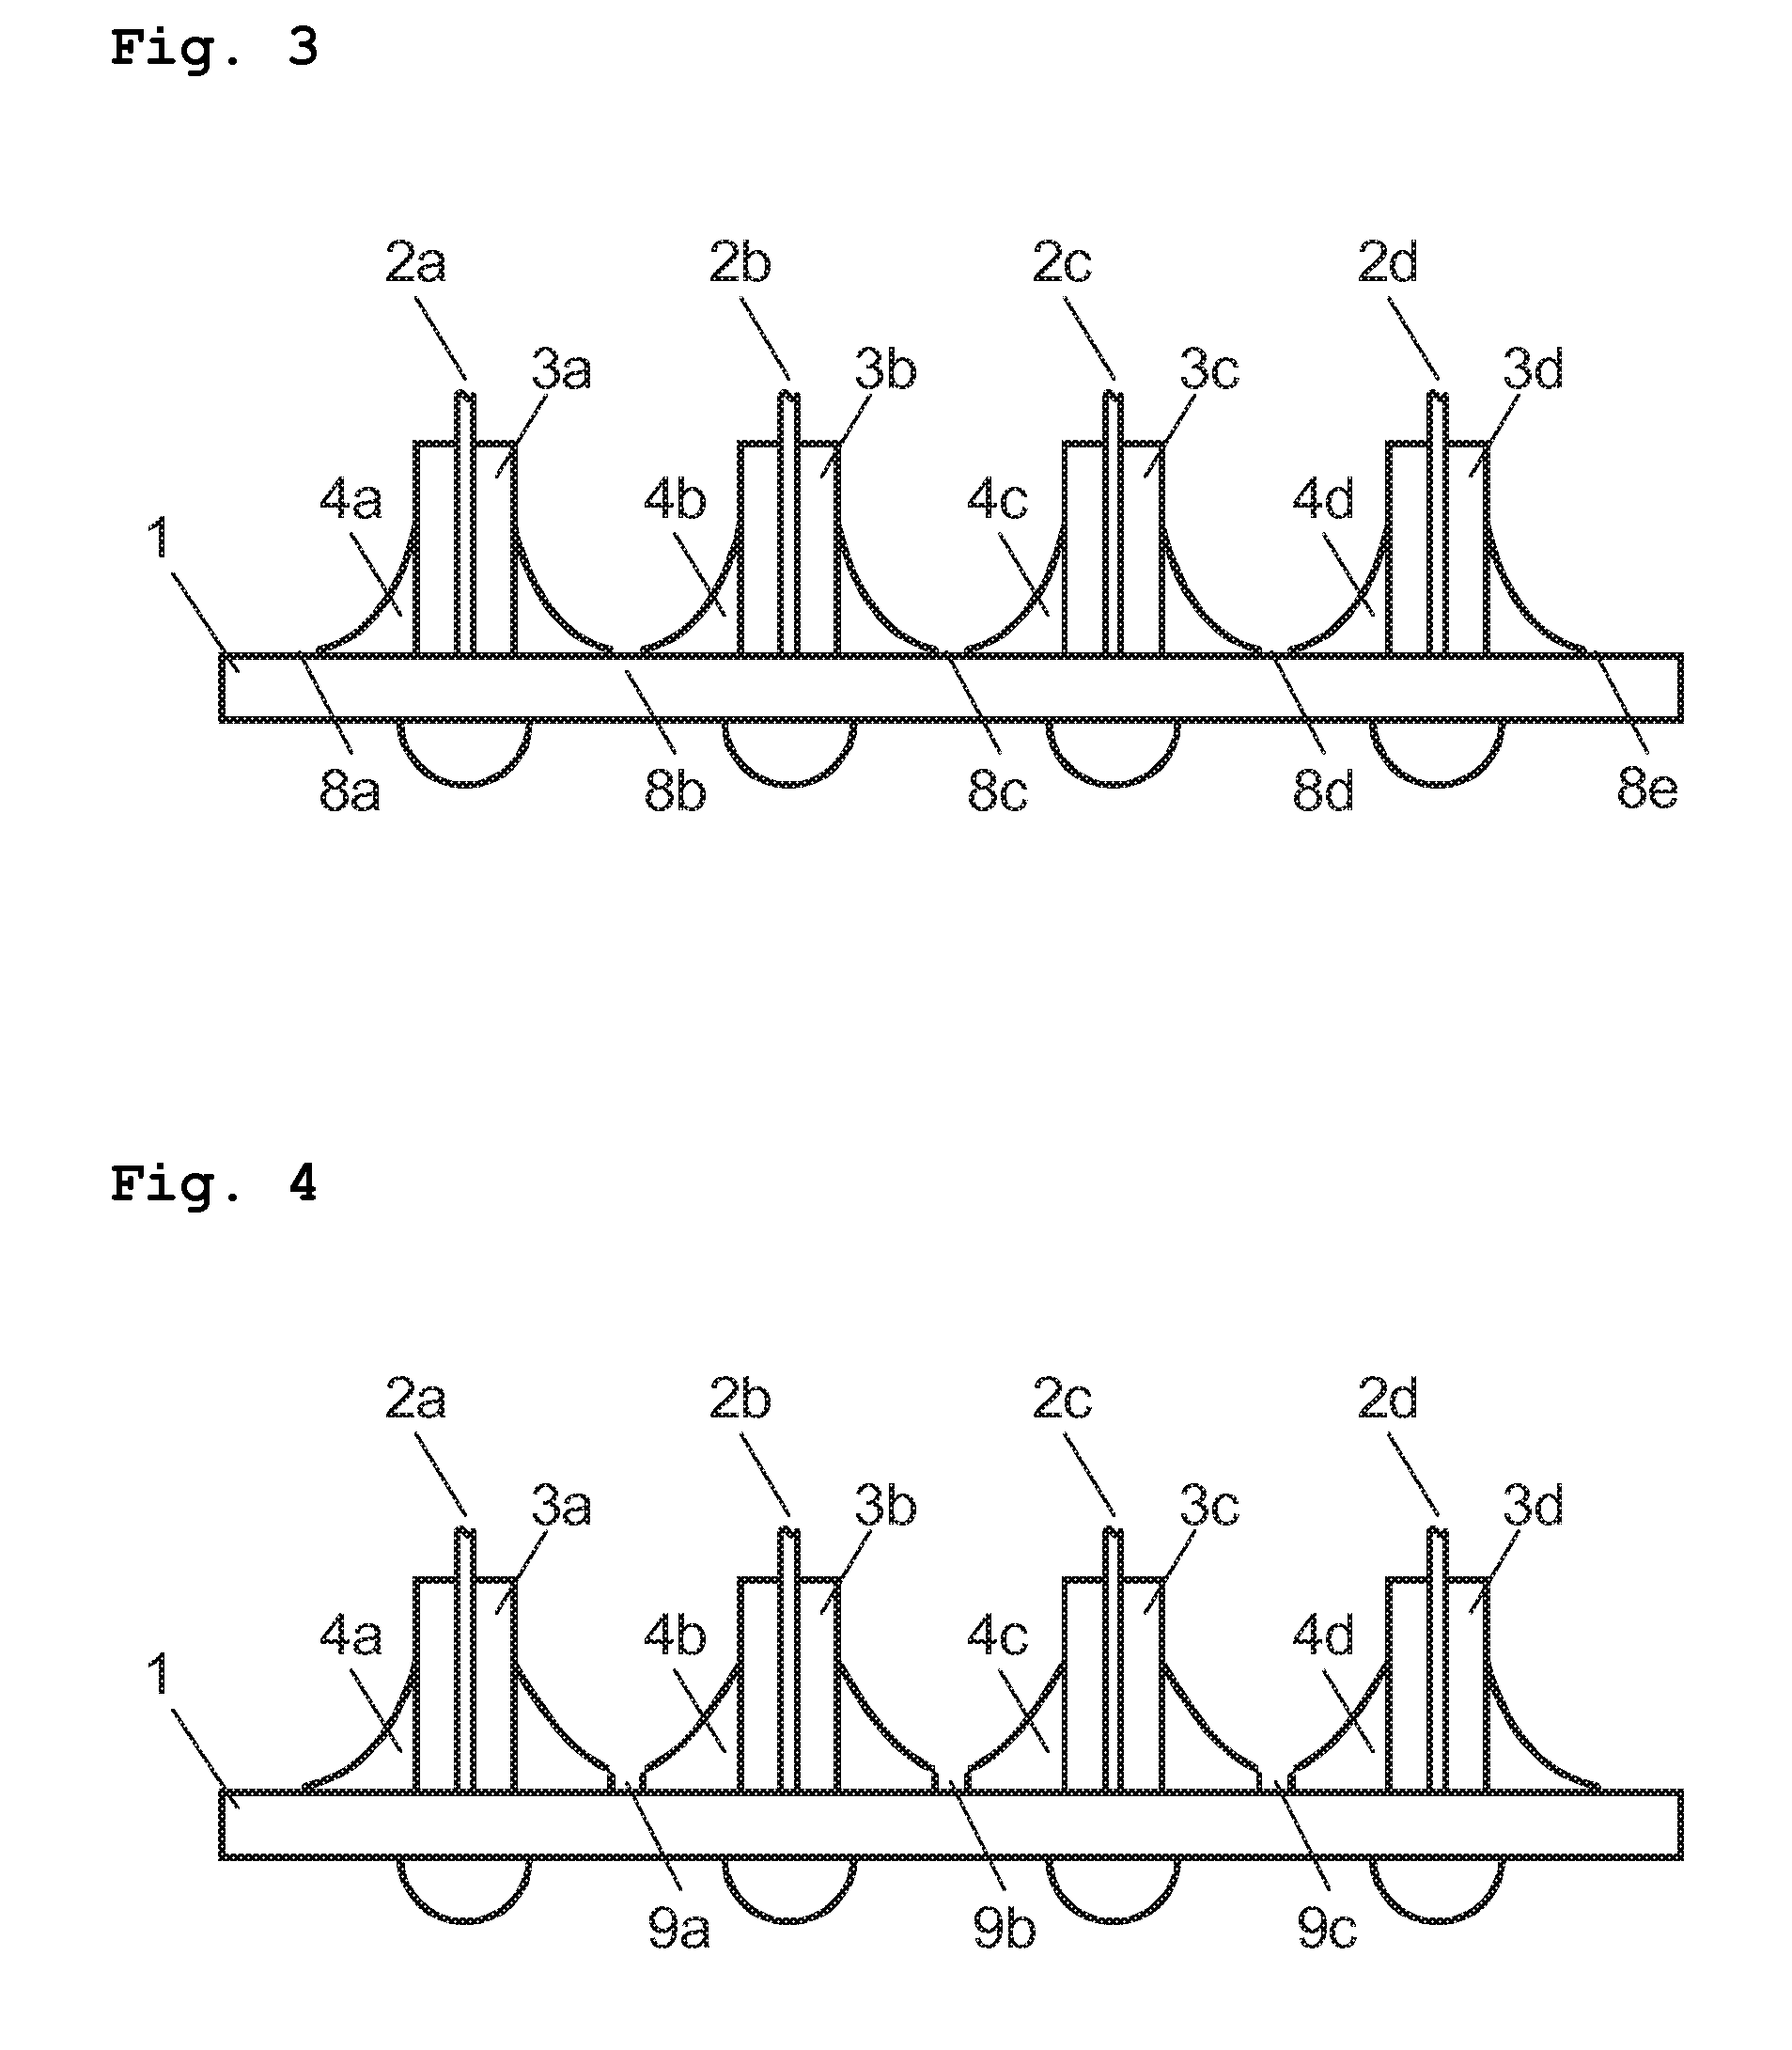 Lens Arrangement for Optical Rotary Joints